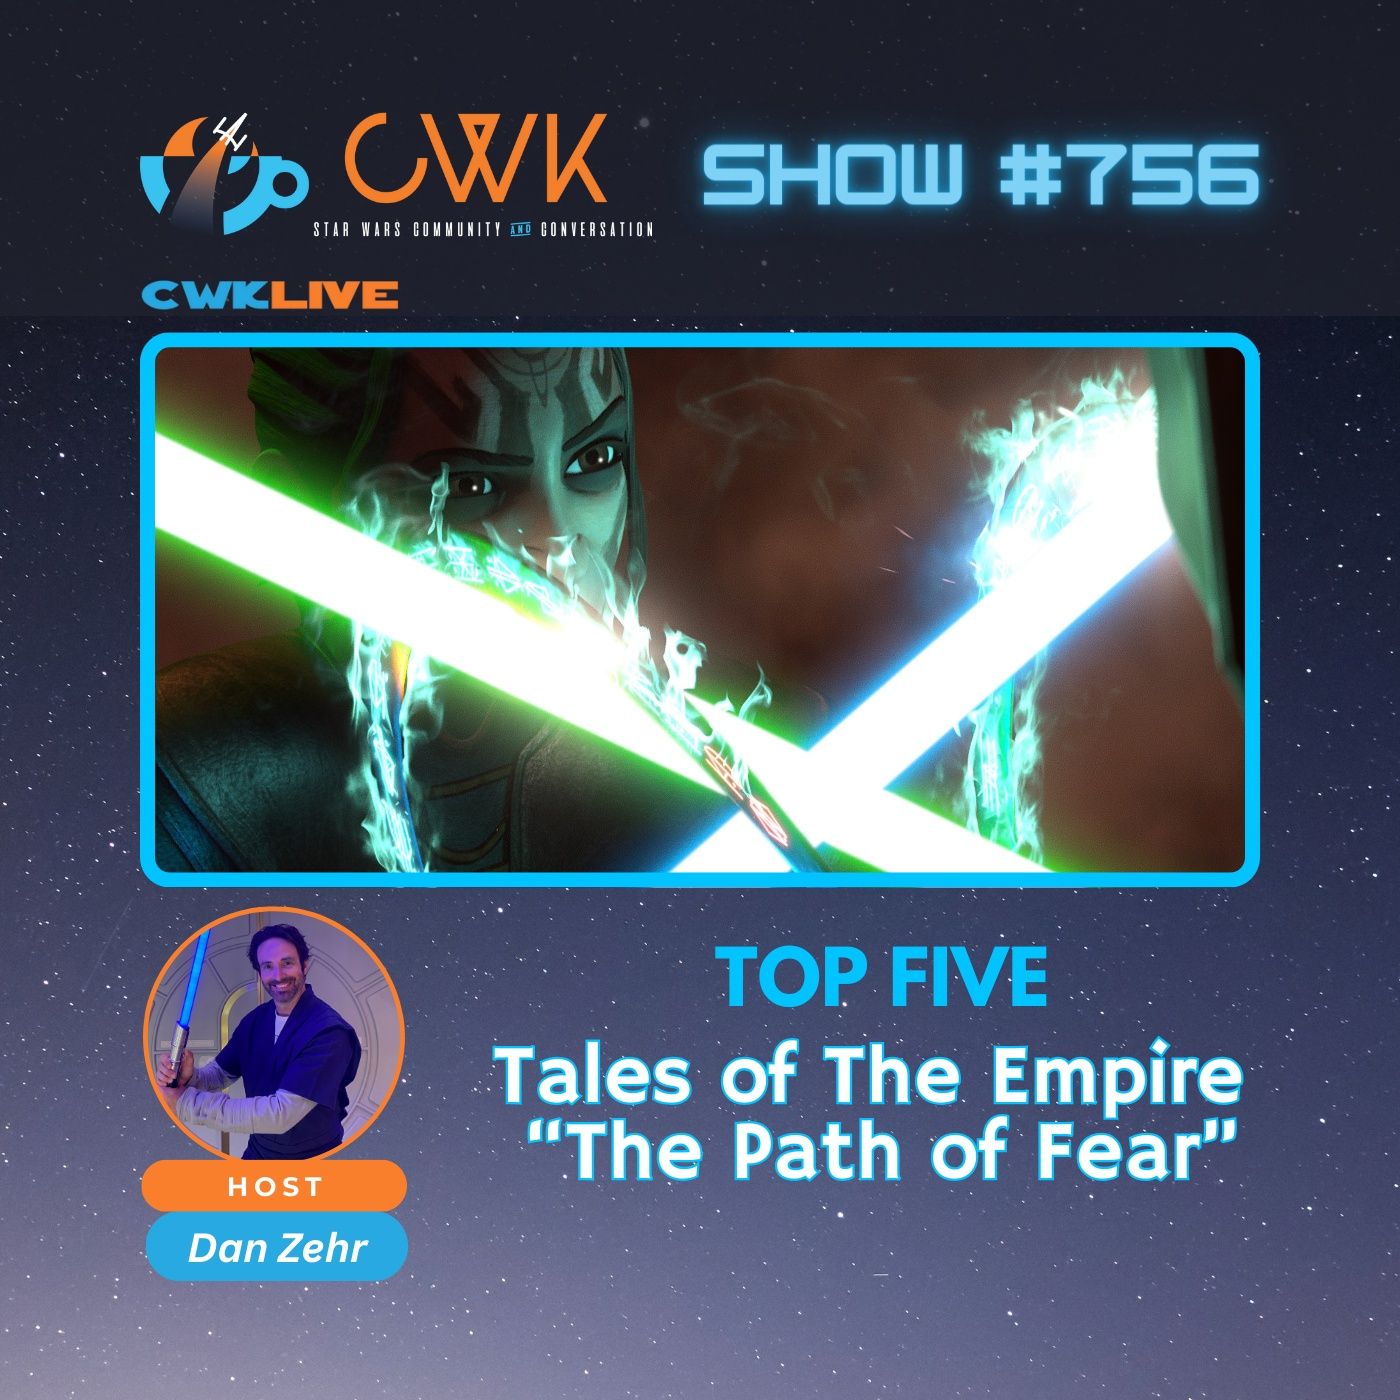 CWK Show #756 LIVE: Top Five Moments from Tales of The Empire ”The Path of Fear”